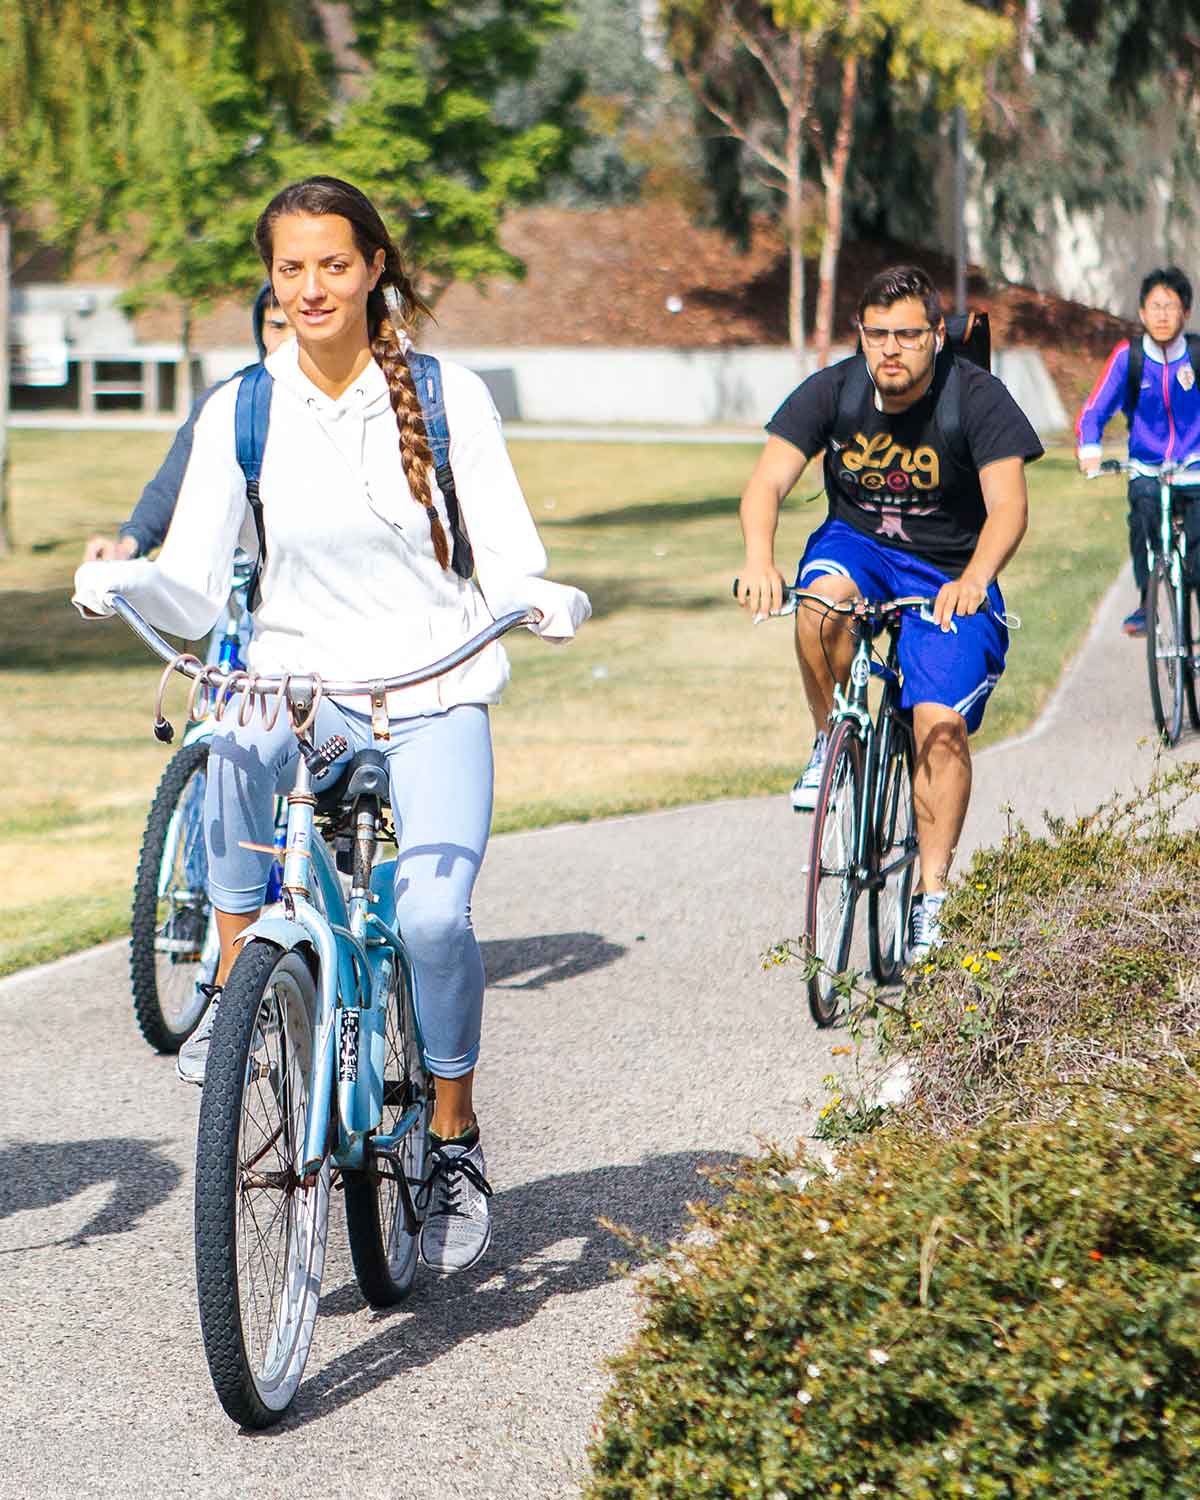 today's students riding bikes